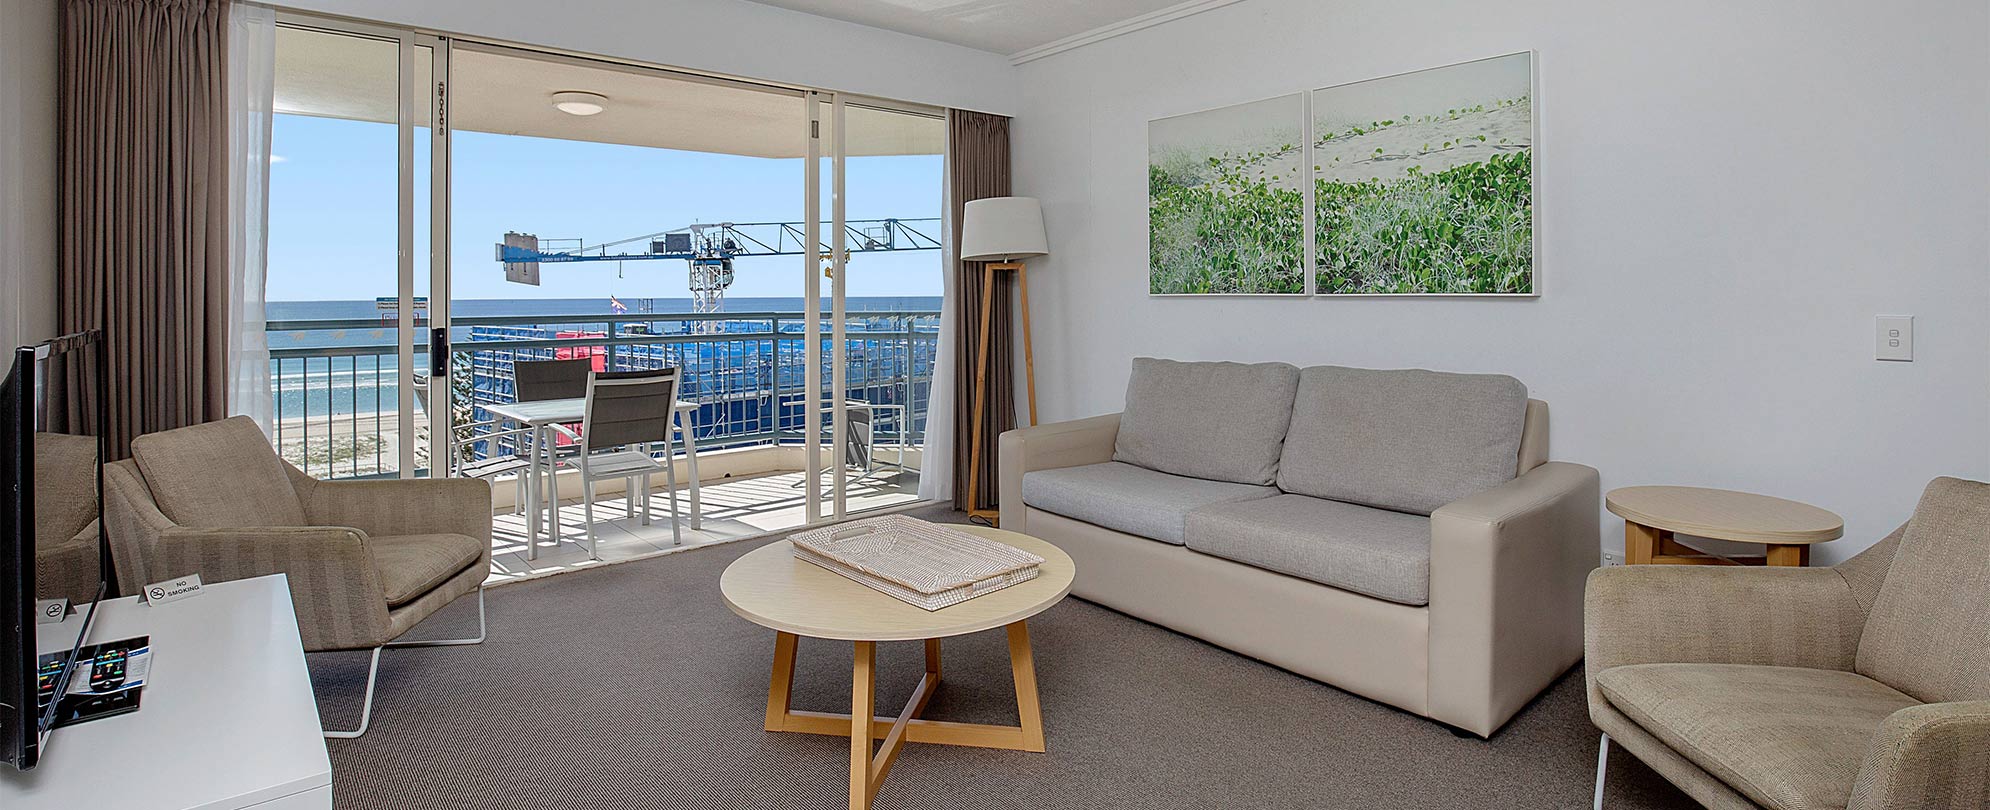 The living area of a Club Wyndham Kirra Beach ocean view suite with a couch, chairs, tv, and glass sliding door to a balcony.